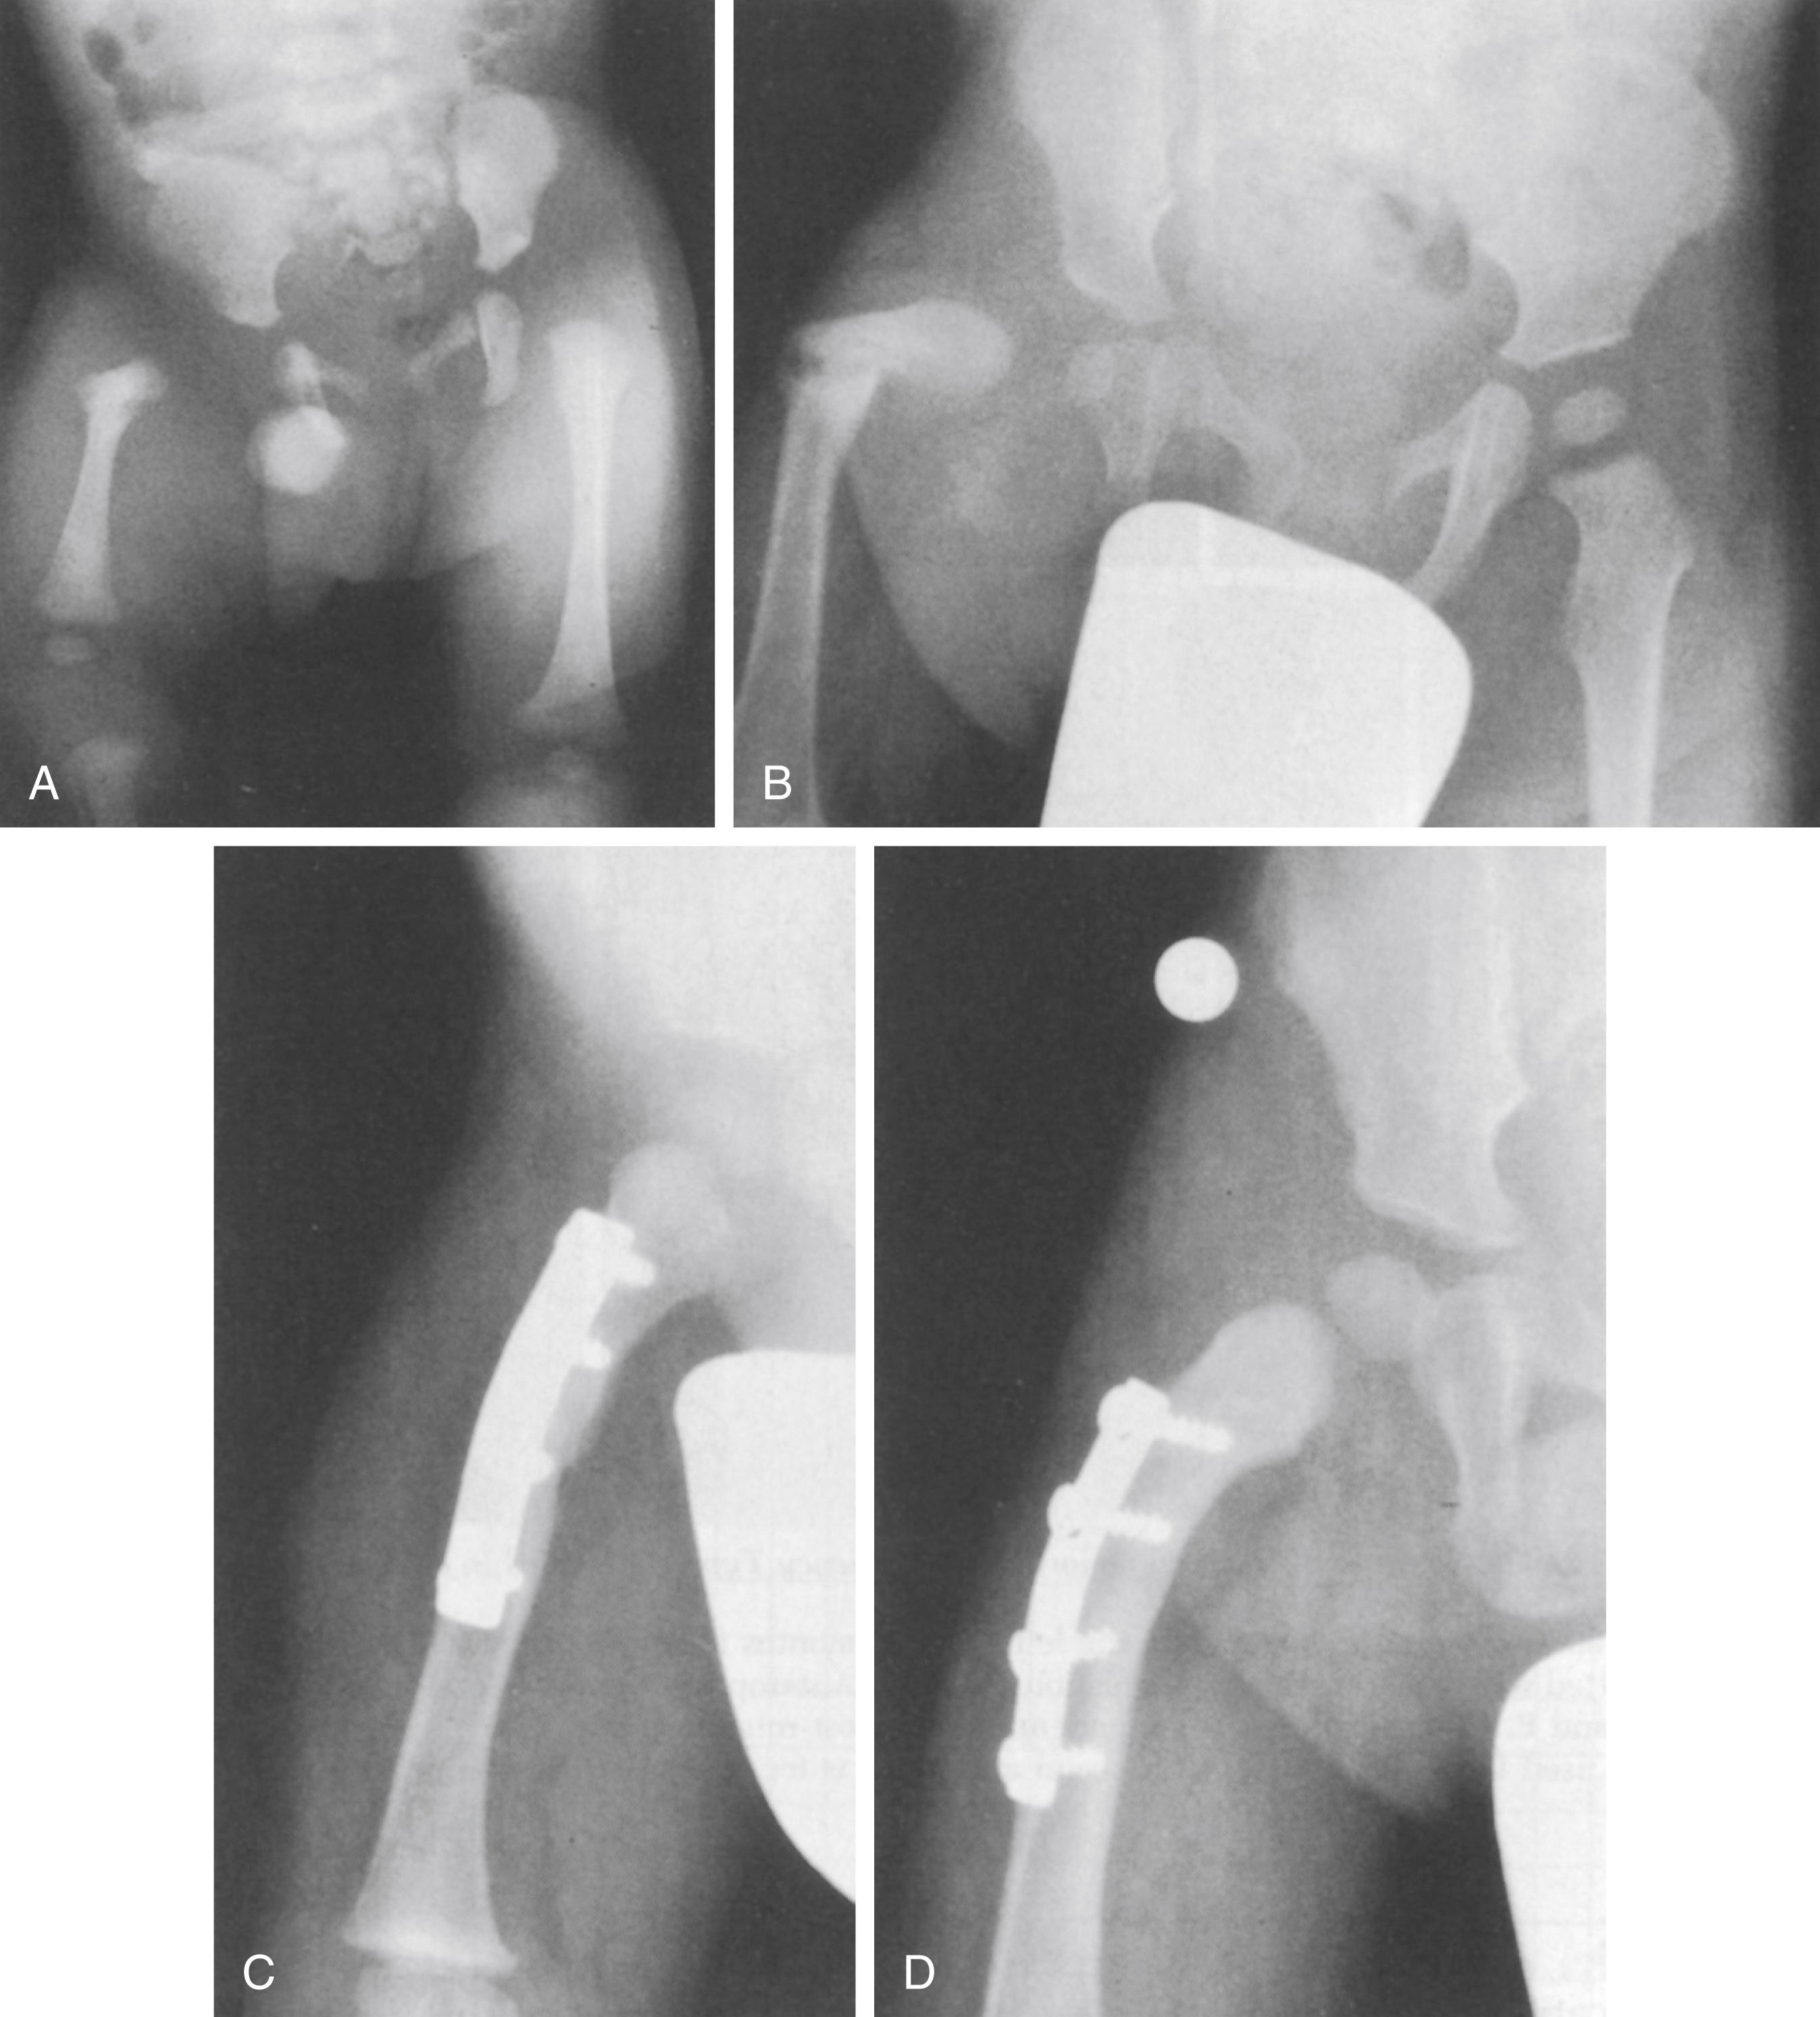 Fig. 21.23, An 18 month old girl with proximal focal femoral deficiency. (A) Anteroposterior (AP) radiograph at 18 months showing no ossification between the upper femoral shaft and the femoral head in the acetabulum. (B) AP radiograph at age 8 years showing further ossification of the upper femur with marked coxa vara. (C) AP radiograph at age 15 years following proximal femoral valgus osteotomy at age 8 years. (D) Clinical photograph at age 8 showing that her left knee is at the level of the right mid femur. (E and F) She became a vigorous athlete and was a varsity cheerleader at a major university.